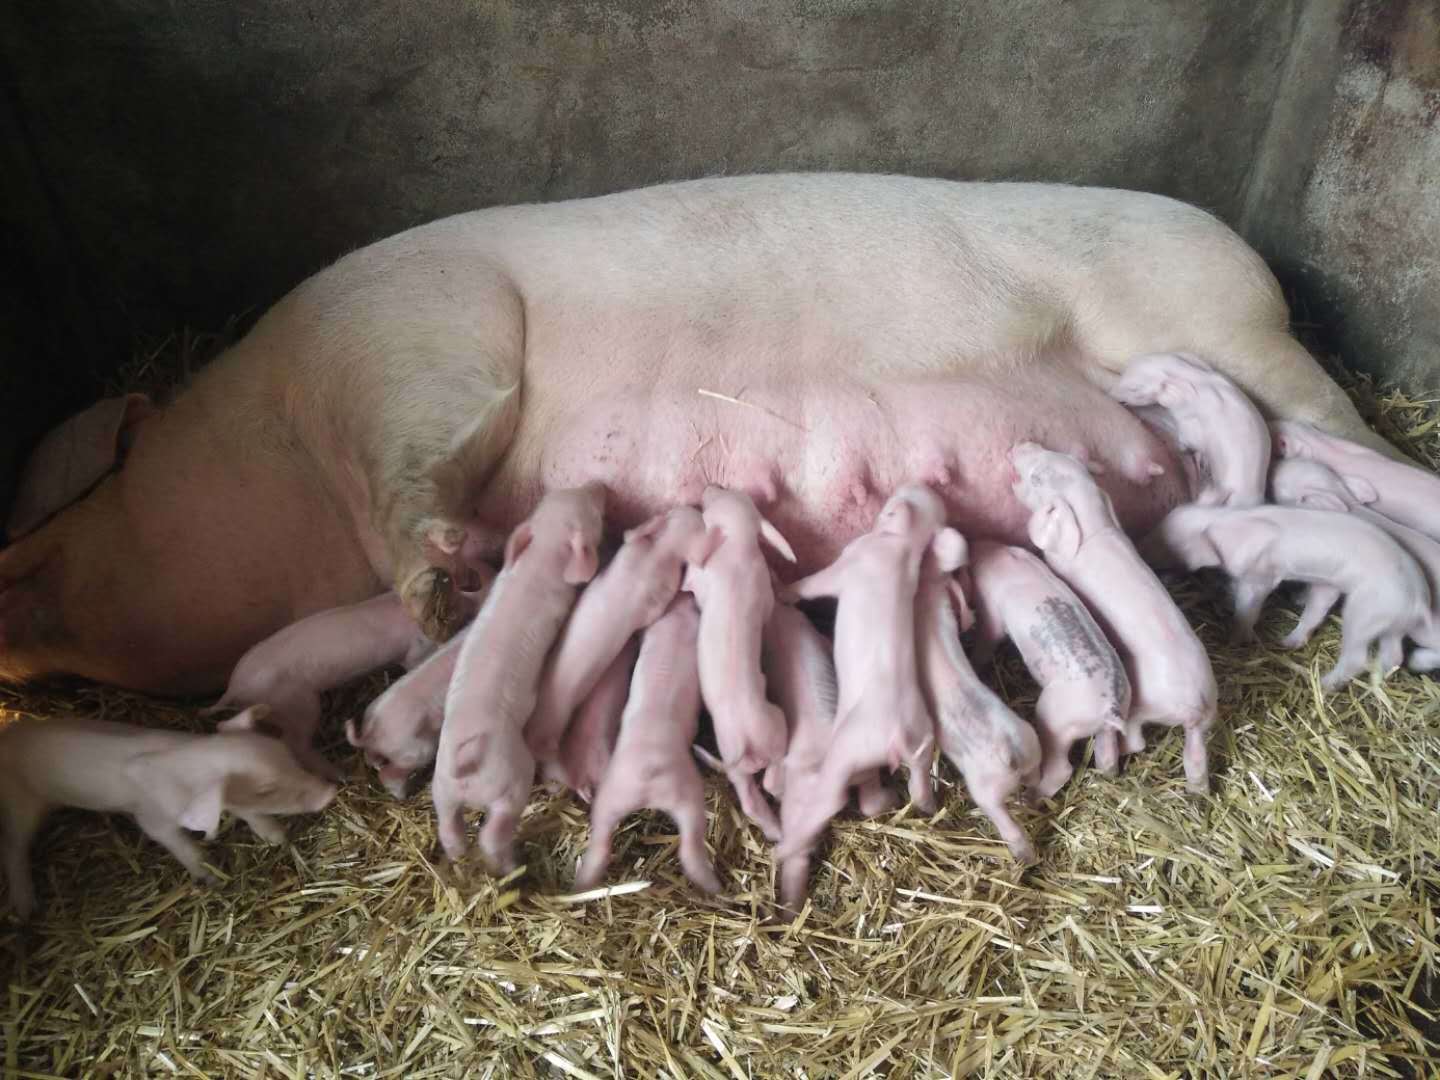 Black and White Pig Feeding Her Piglets · Free Stock Photo